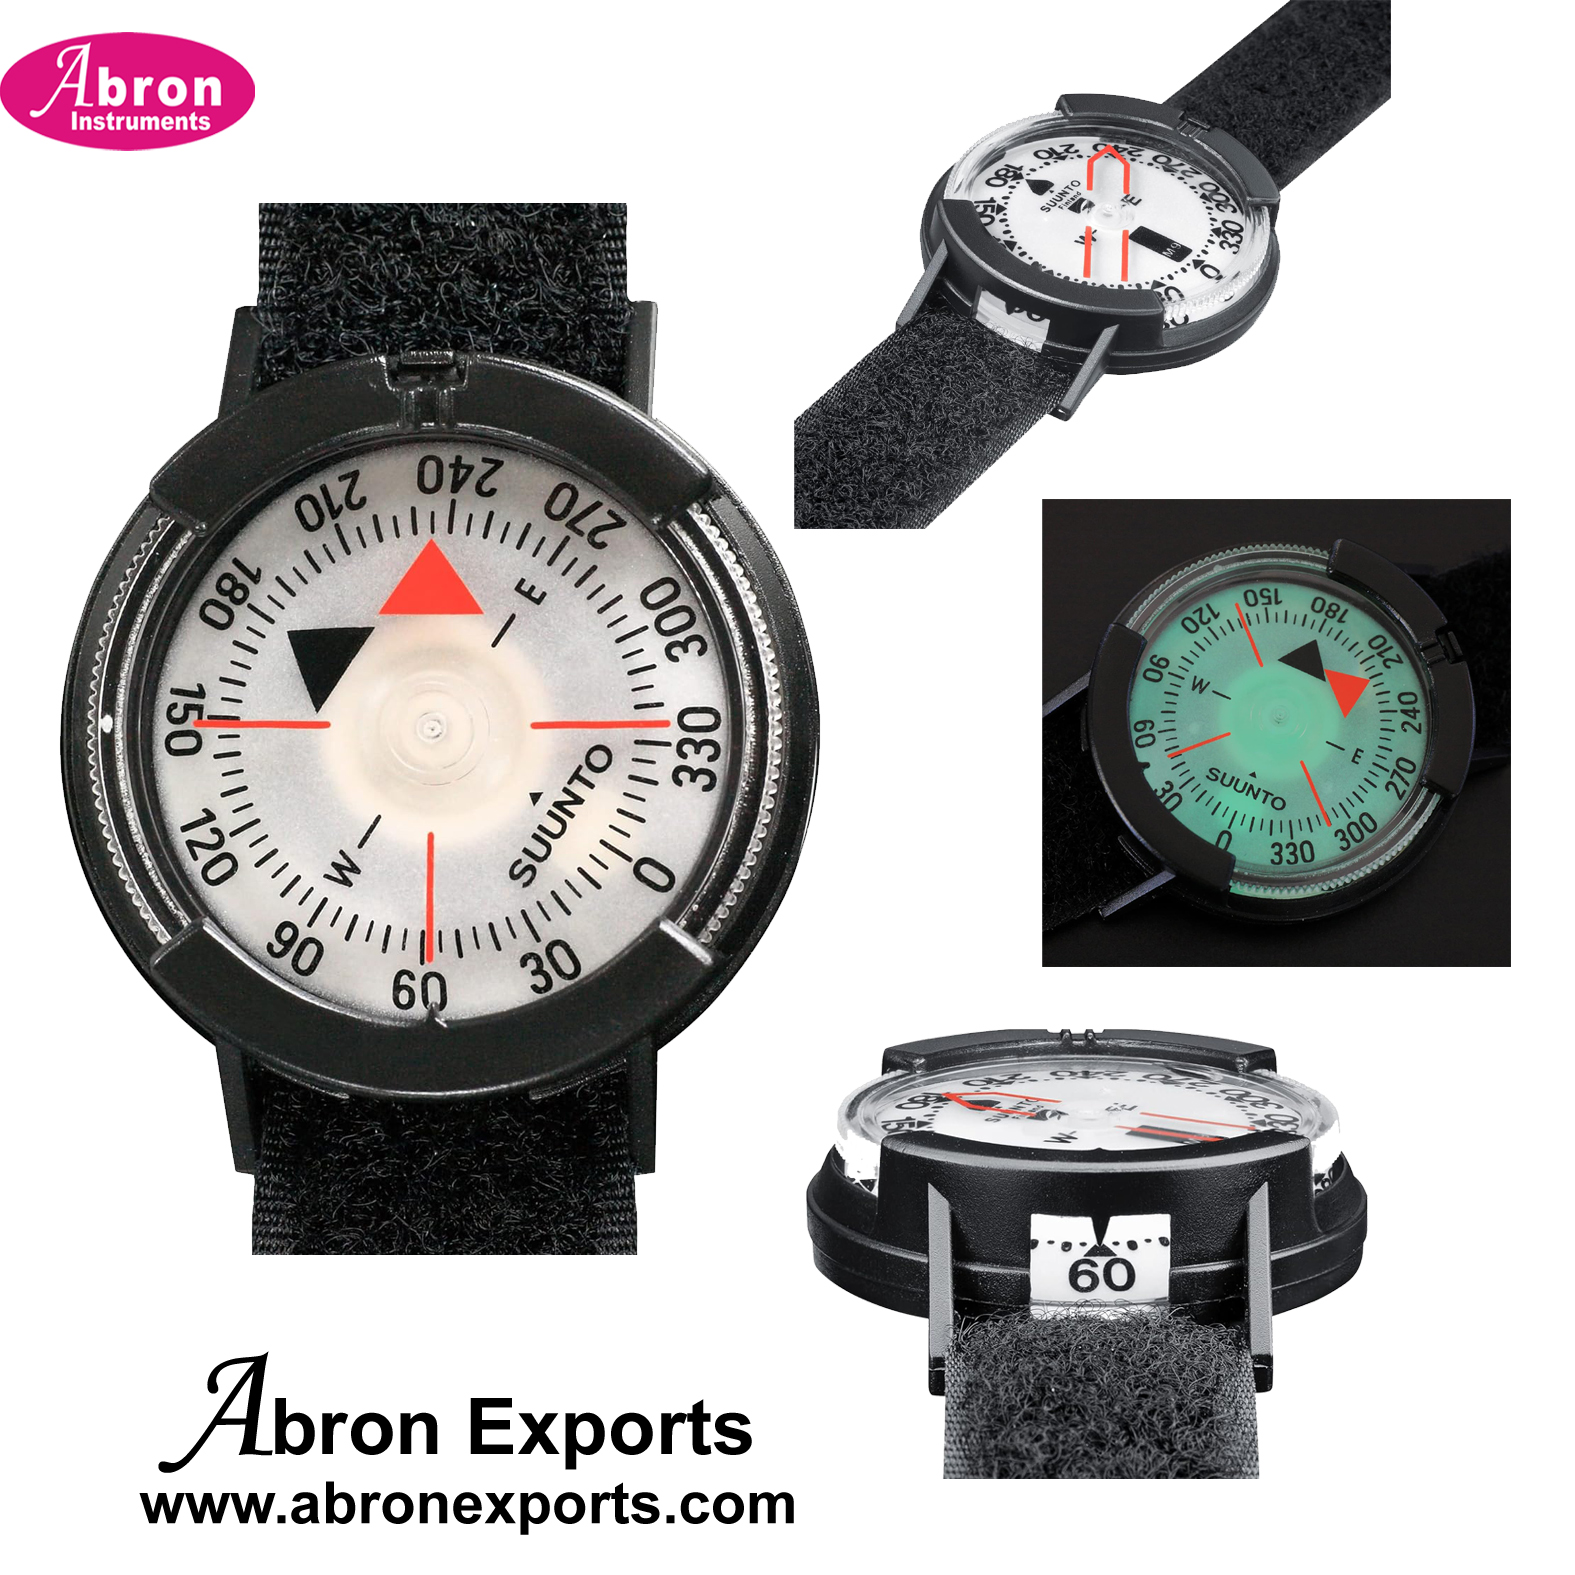 Compass Wrist with Direction Finding Compass Suunto With Viewing Window Surveying Abron ASI-15DW 